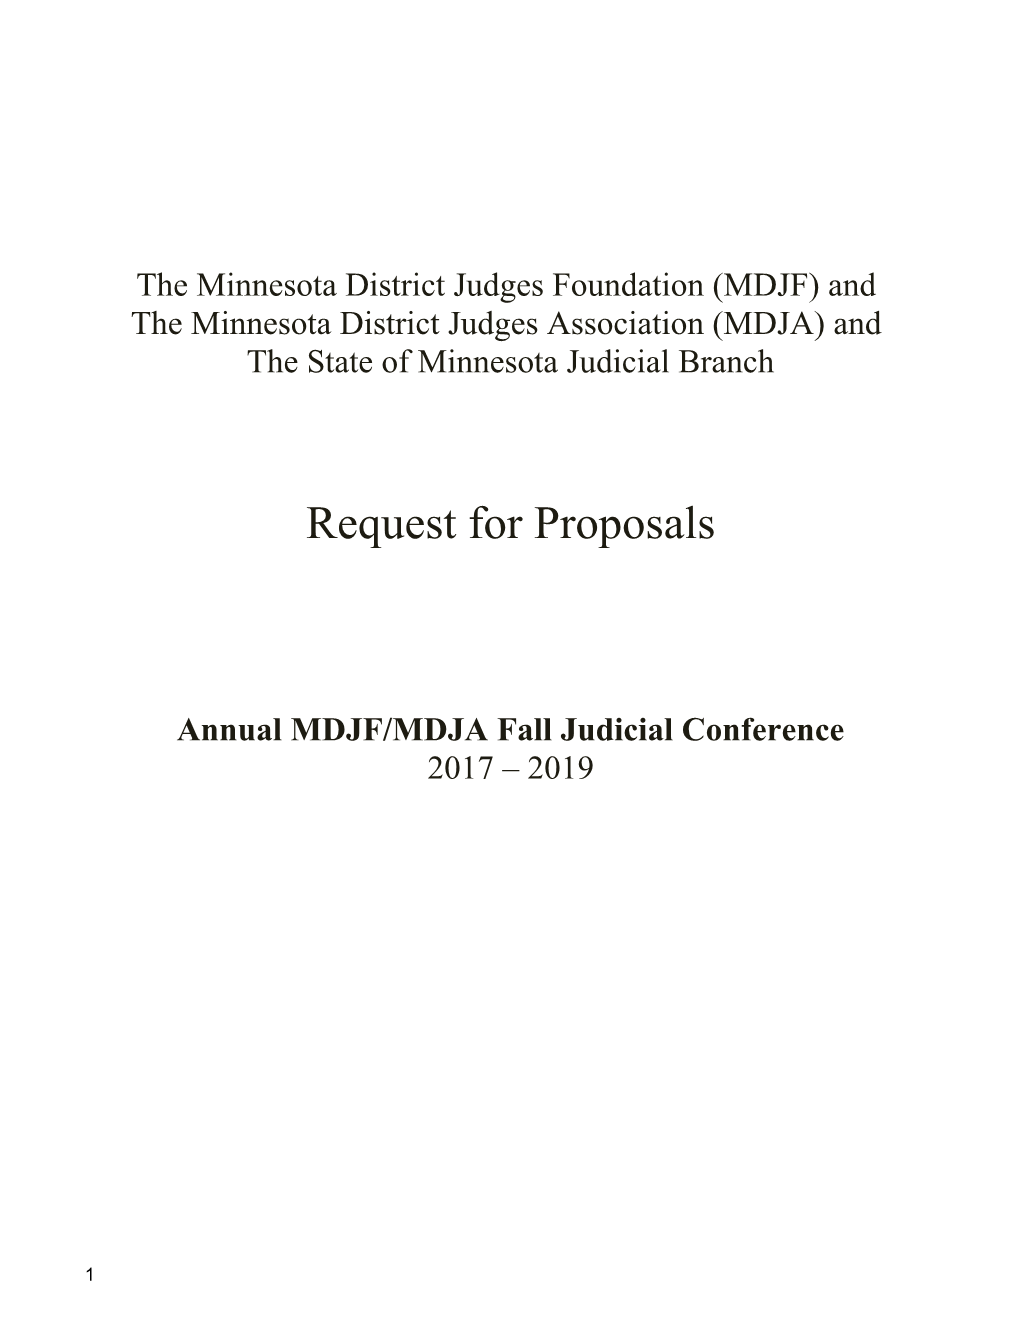 The Minnesota District Judges Foundation (MDJF) And